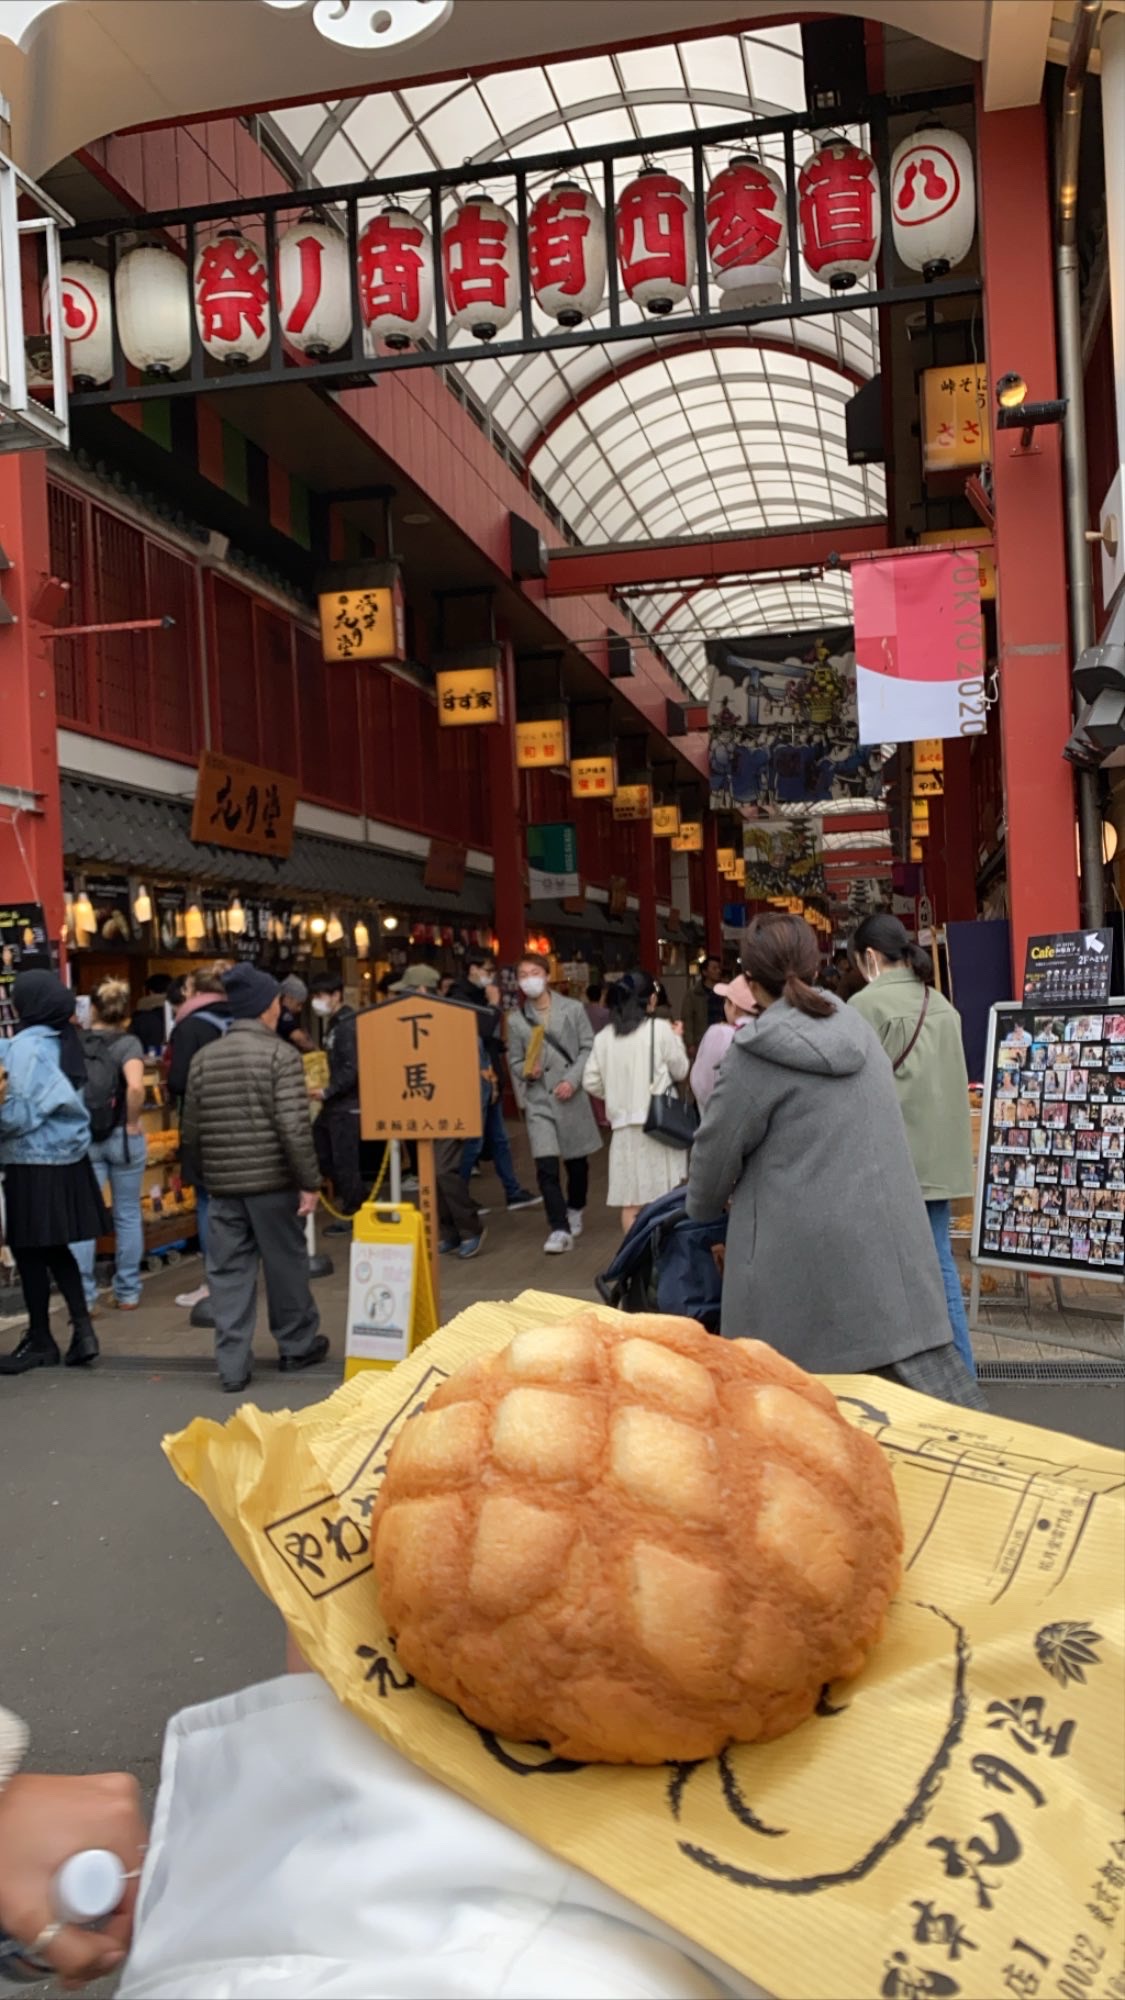 Melon pan being held up in front of a road full of shops and food places